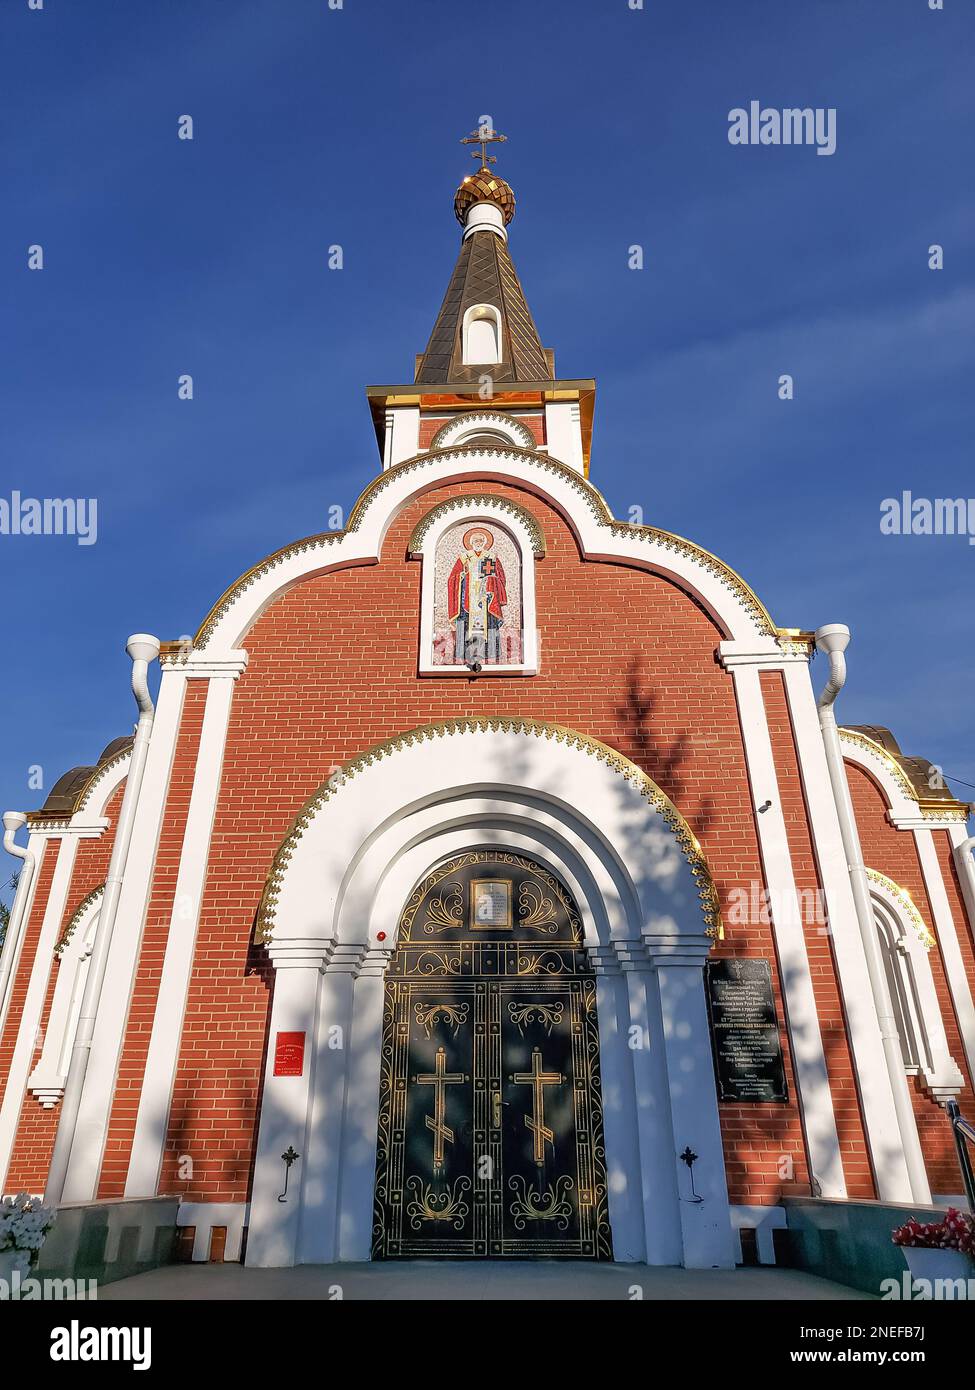 Gospel of Jesus Christ. The religious church is a chapel for praying to God.Golden domes with a crucifix at the top.A holy place for Orthodox Christia Stock Photo